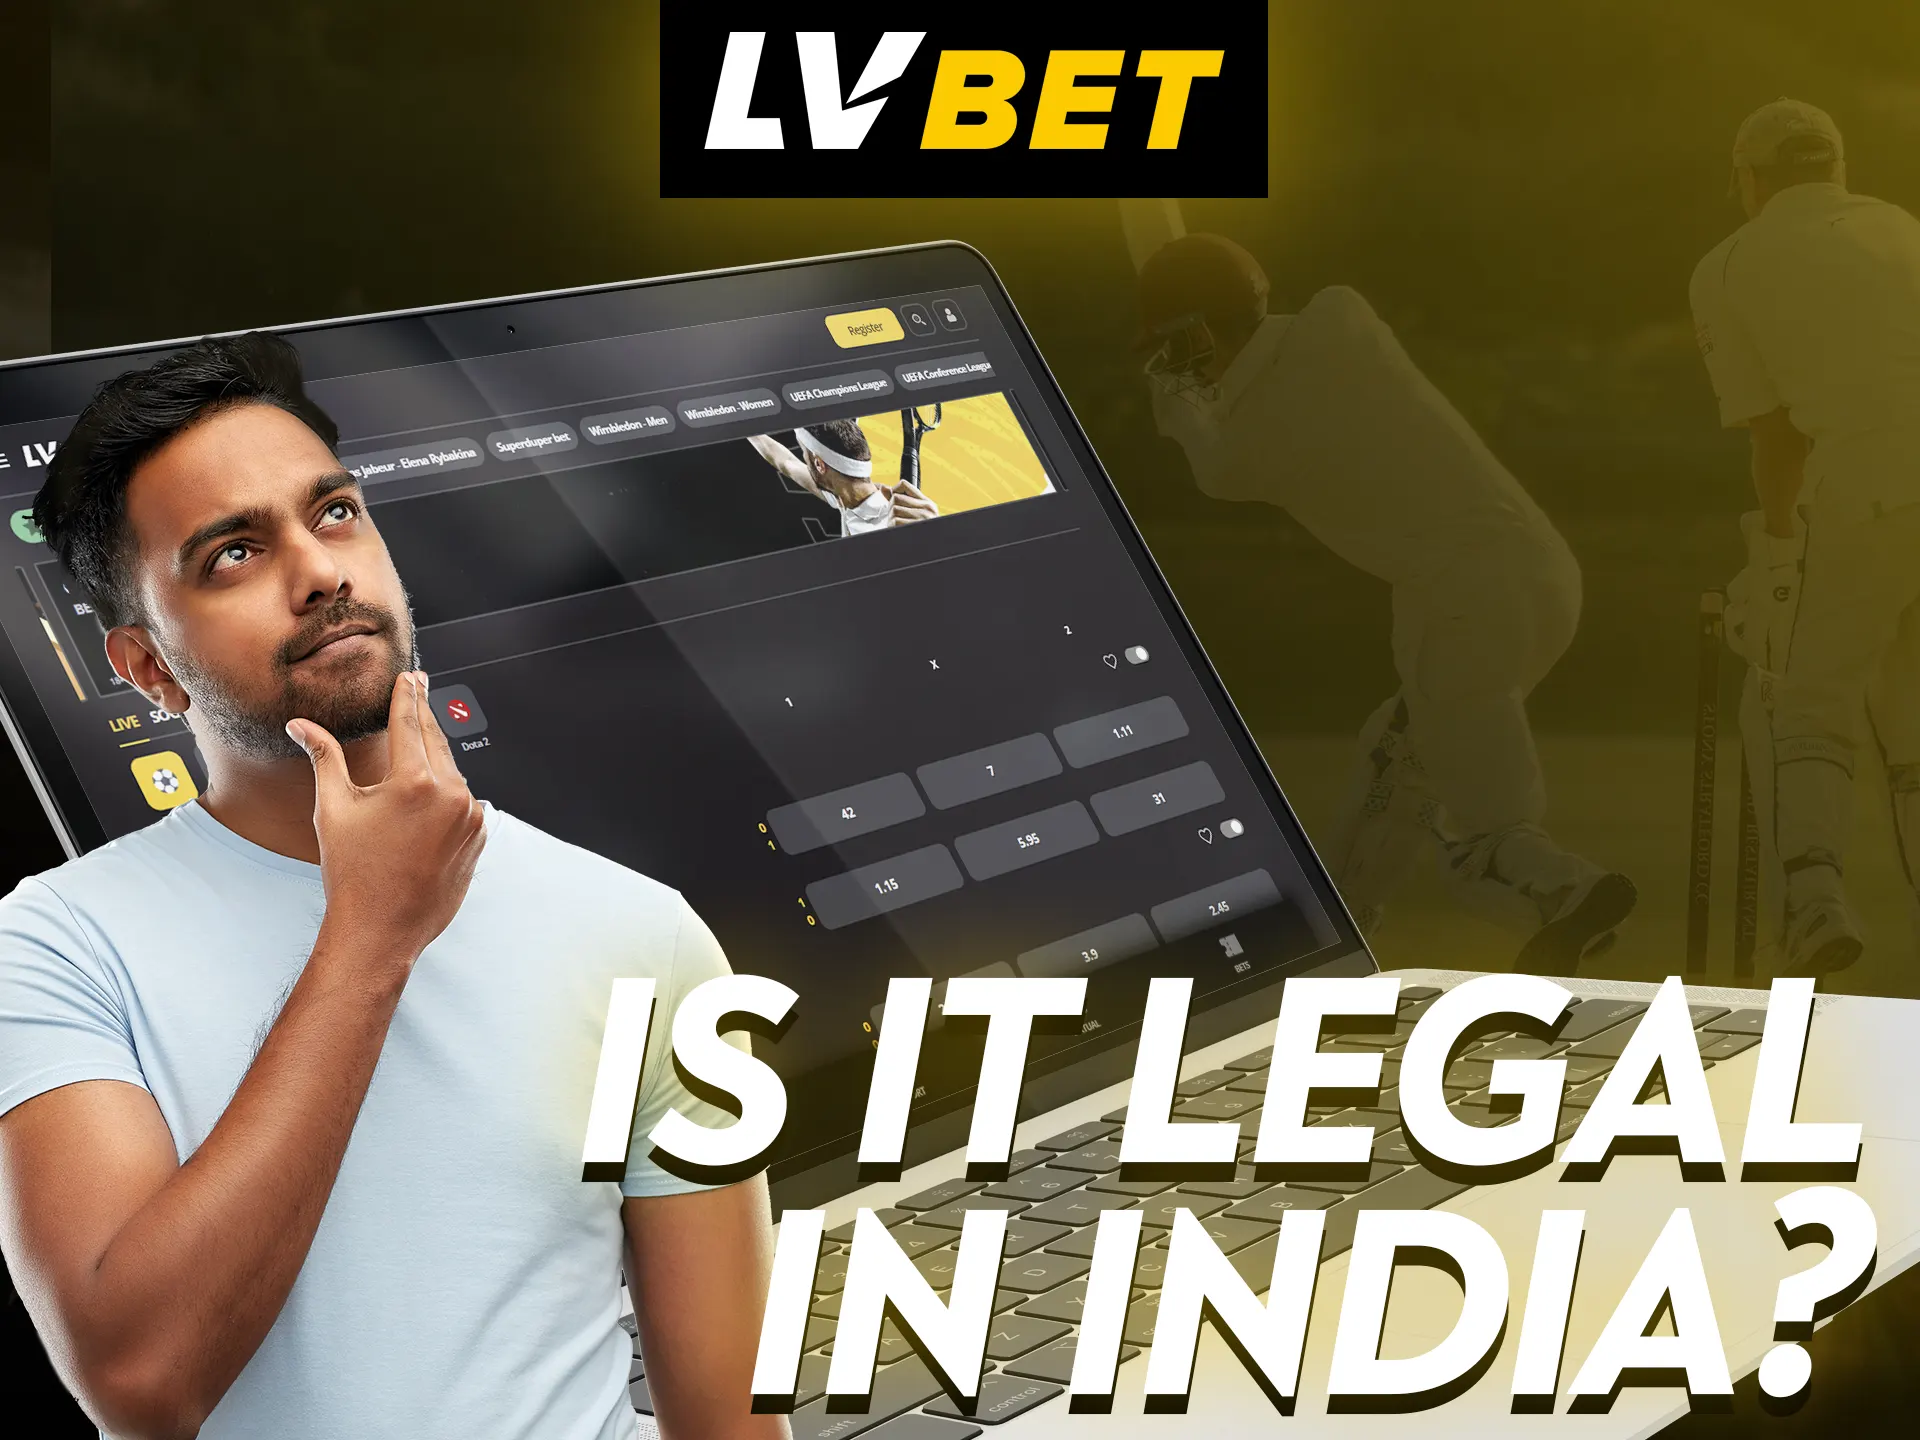 LV Bet is legal and safe for players in India.